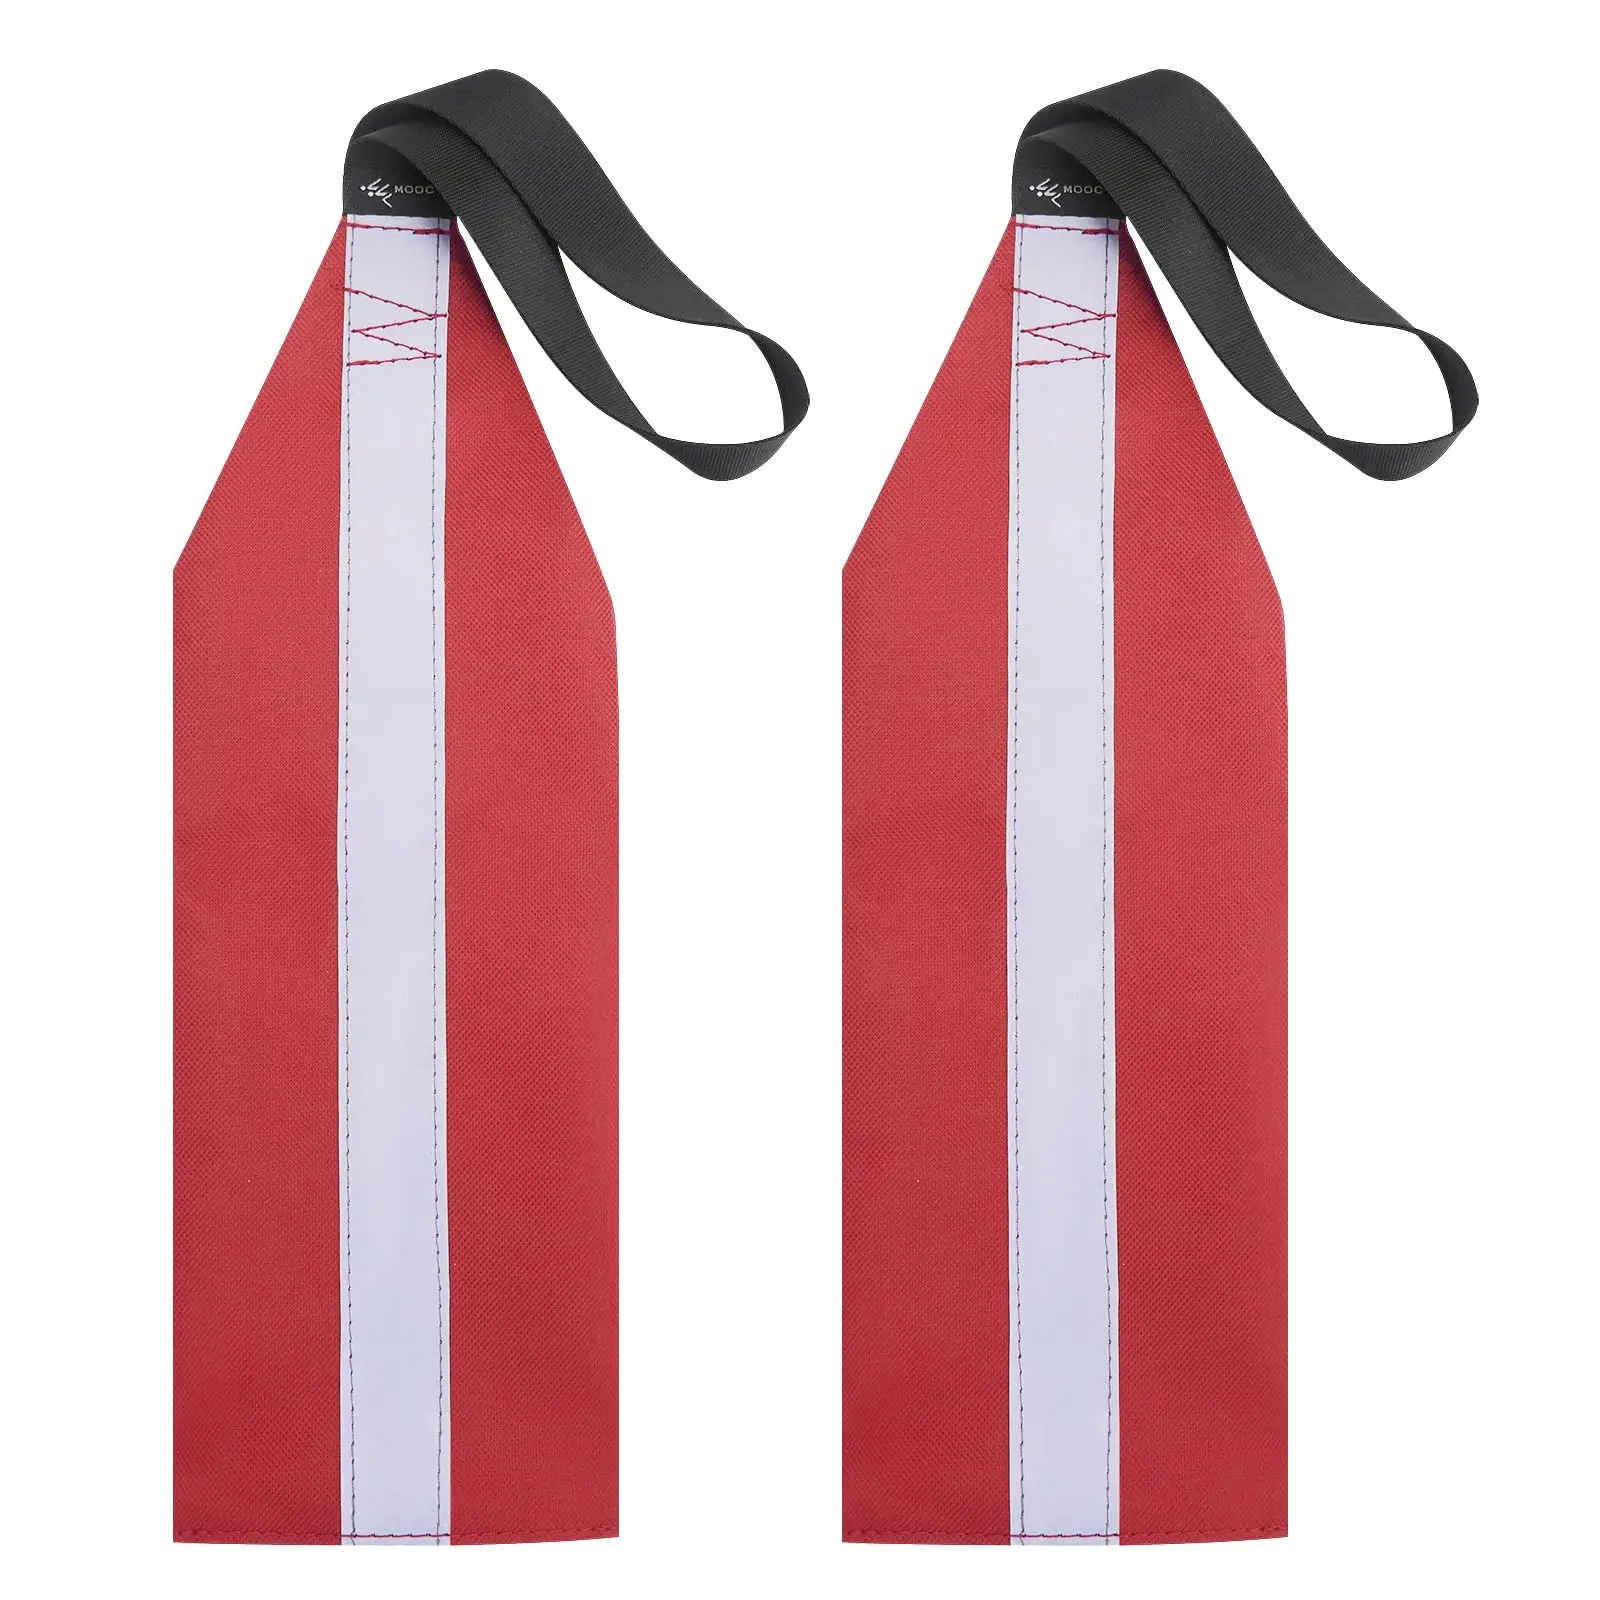 Red Flag Truck Loads (Pack of 2), Warning Flags for Kayak Safety Towing,Travel Trailer Tow Accessories school referee flag racing conducting match safety waving referees flags race signal handheld commander